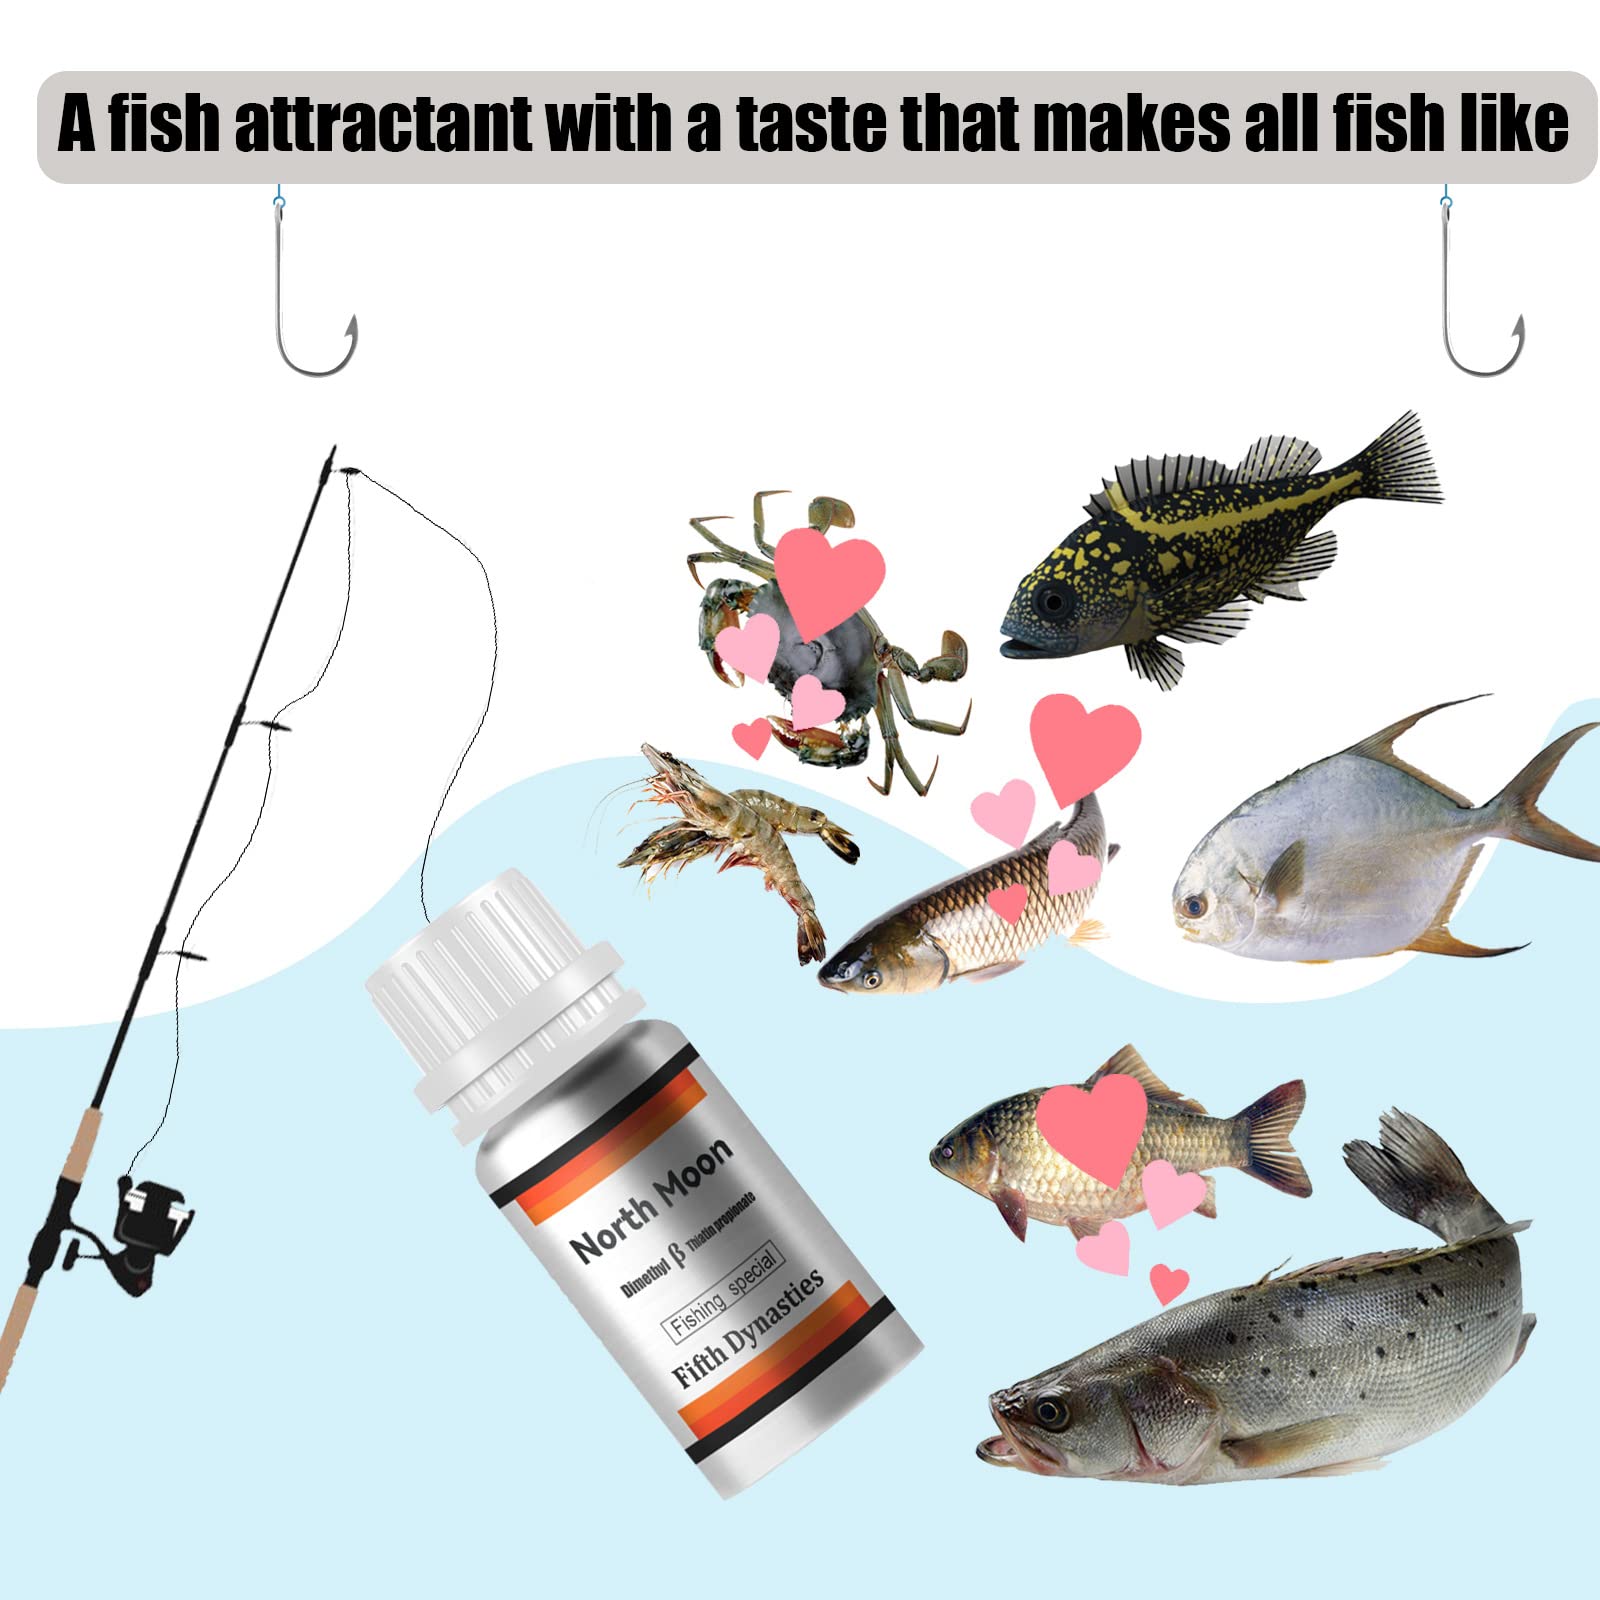 80g/40g DMPT Fish Lures Attractant Fishing Lure Additive Powder High  Concentration Fish Bait Attractant Enhancer Practical Anglers Fishing  Equipment Accessories Trout, Cod, Carp, Bass, Fishing Bait Additive Powder